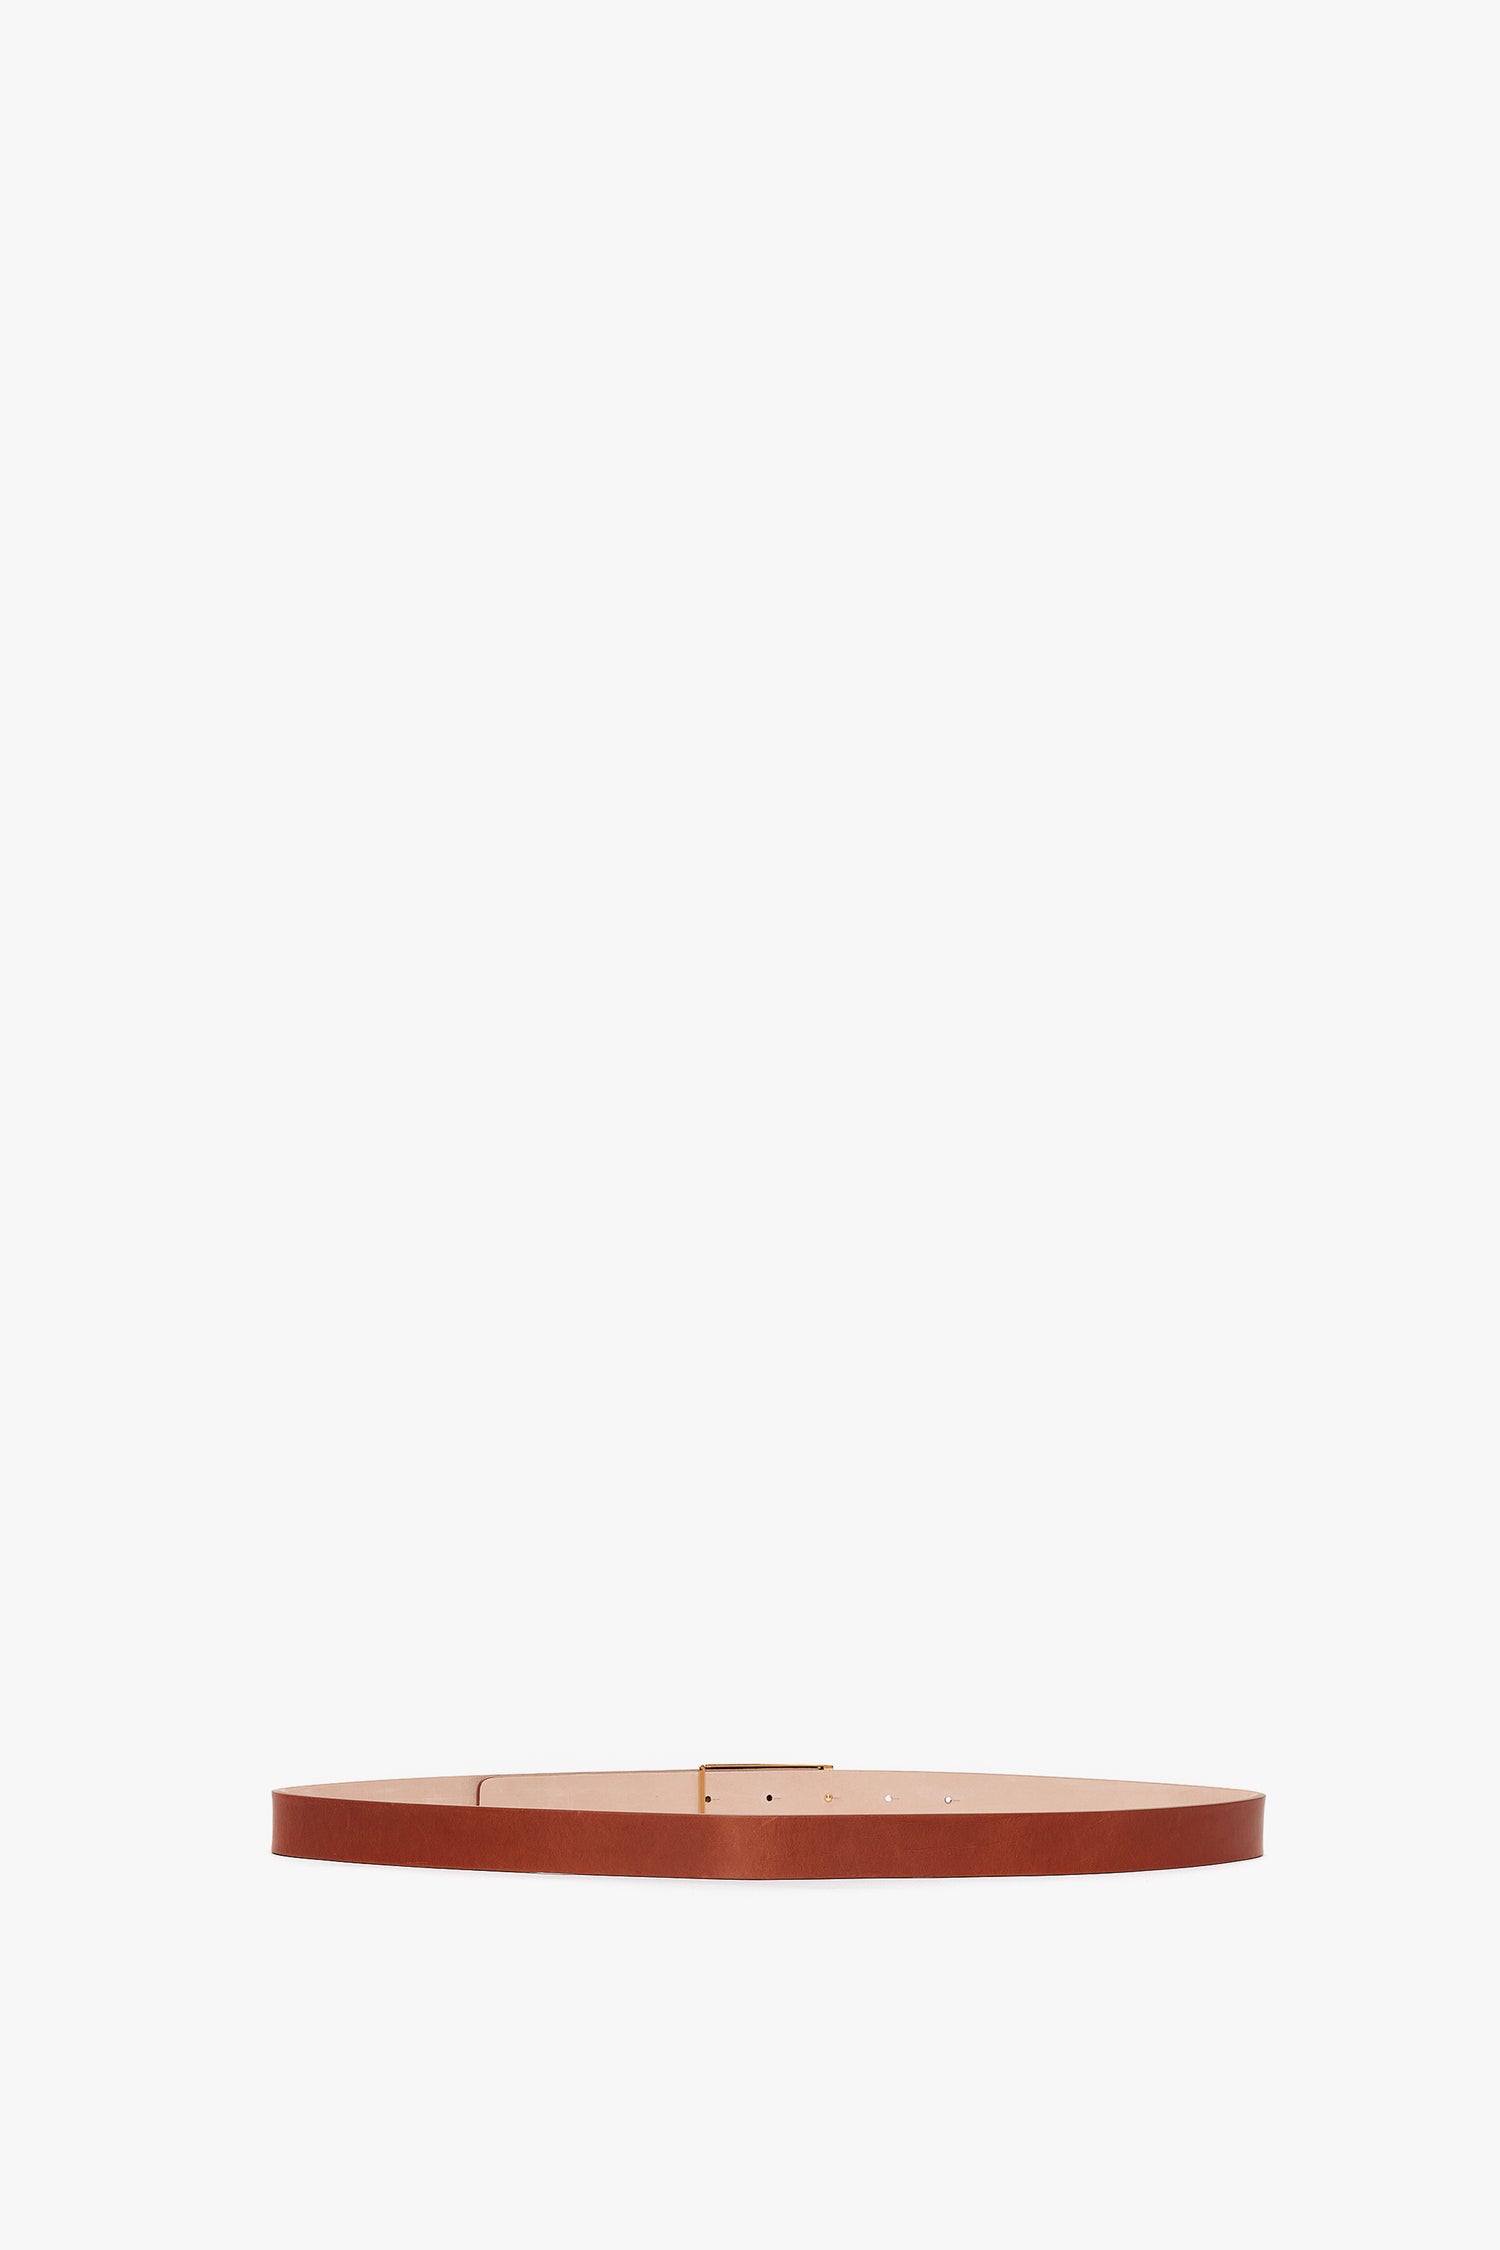 A slender brown Victoria Beckham calf leather belt with a simple gold-tone Exclusive Frame buckle, displayed against a plain white background.